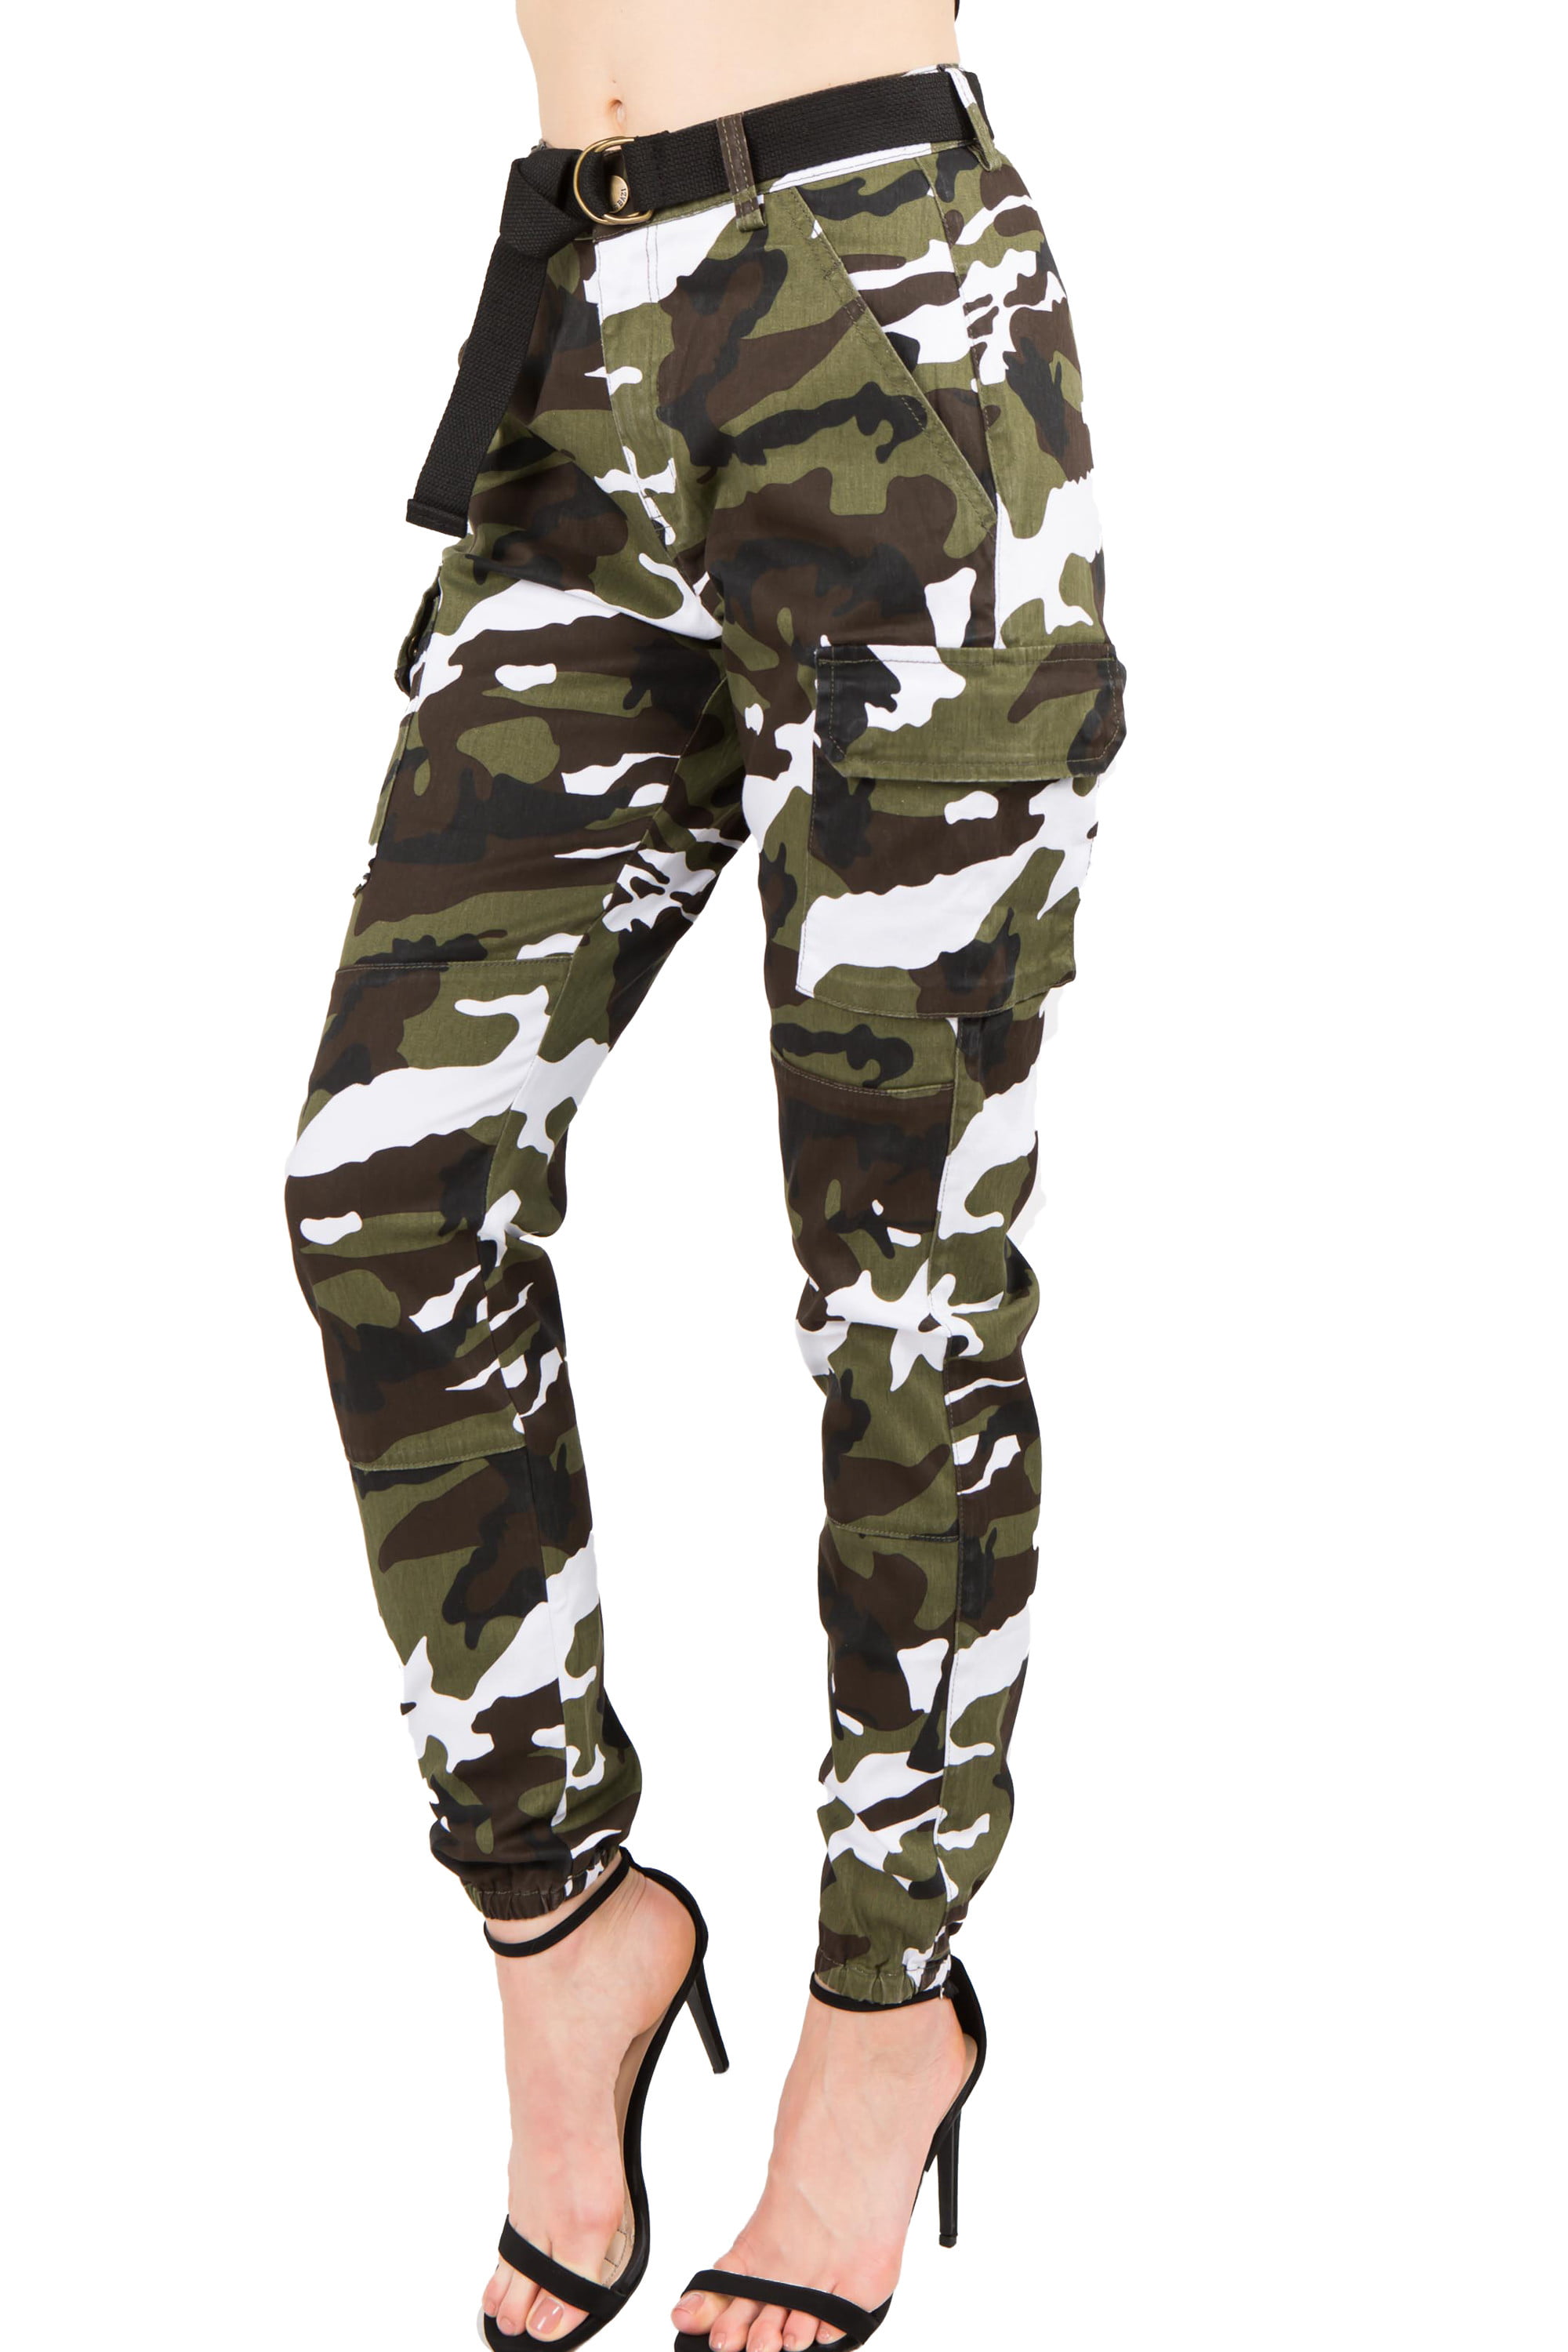 Love Moda Women's Slim Fit Camouflage Cotton Belted Jogger Pants ...